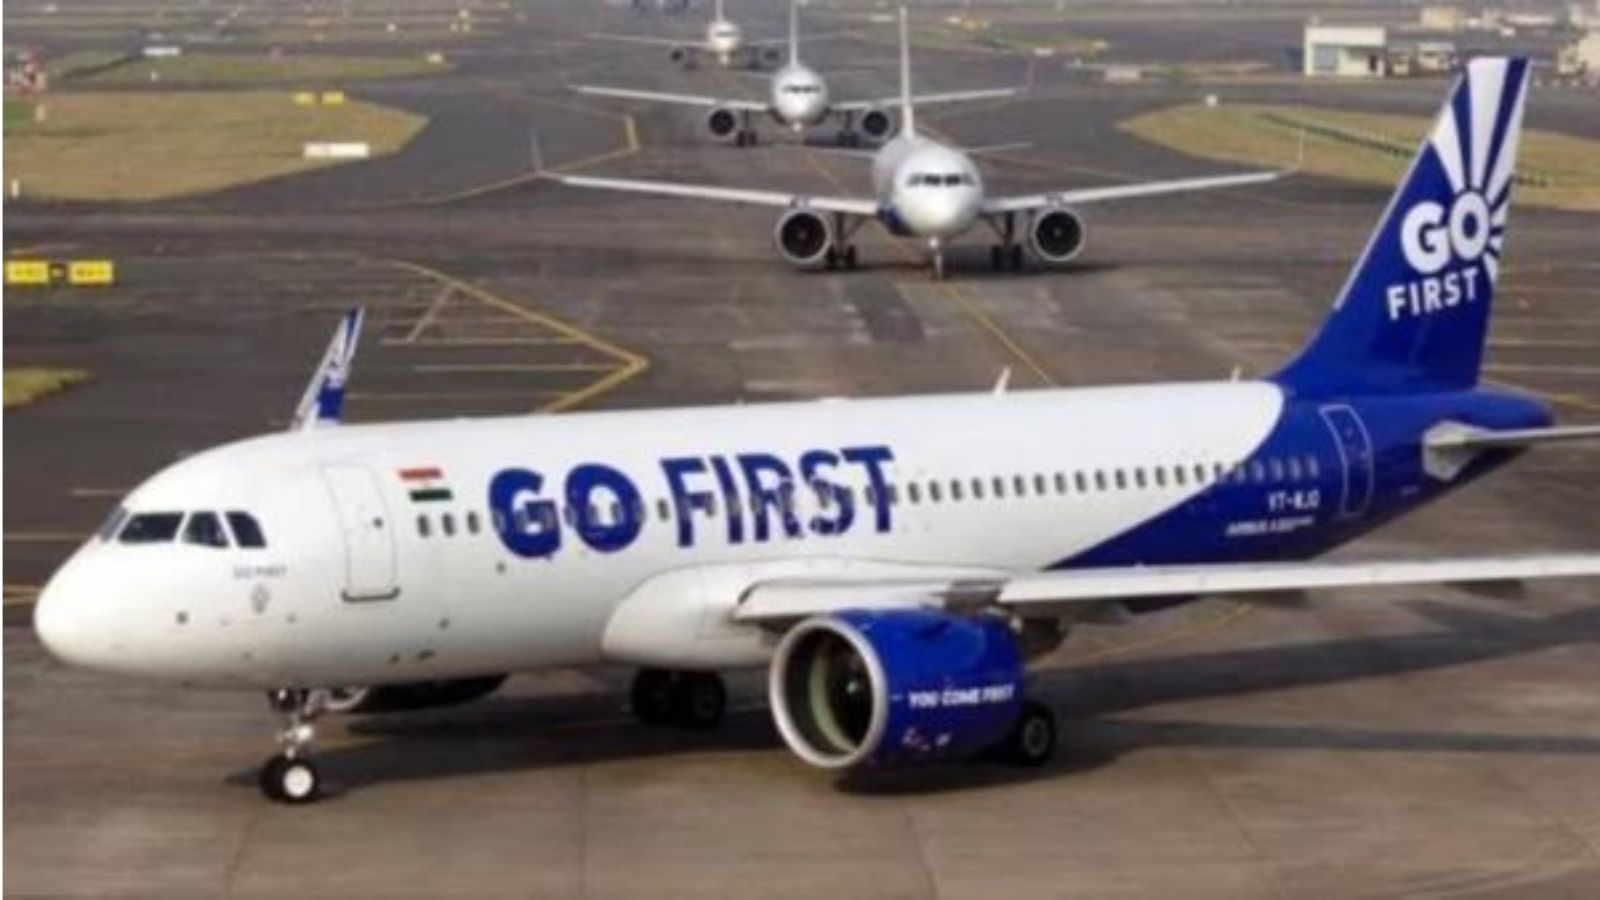 Delhi HC directs DGCA to forthwith process applications of Go First’s lessors’ to deregister aircraft | Business News